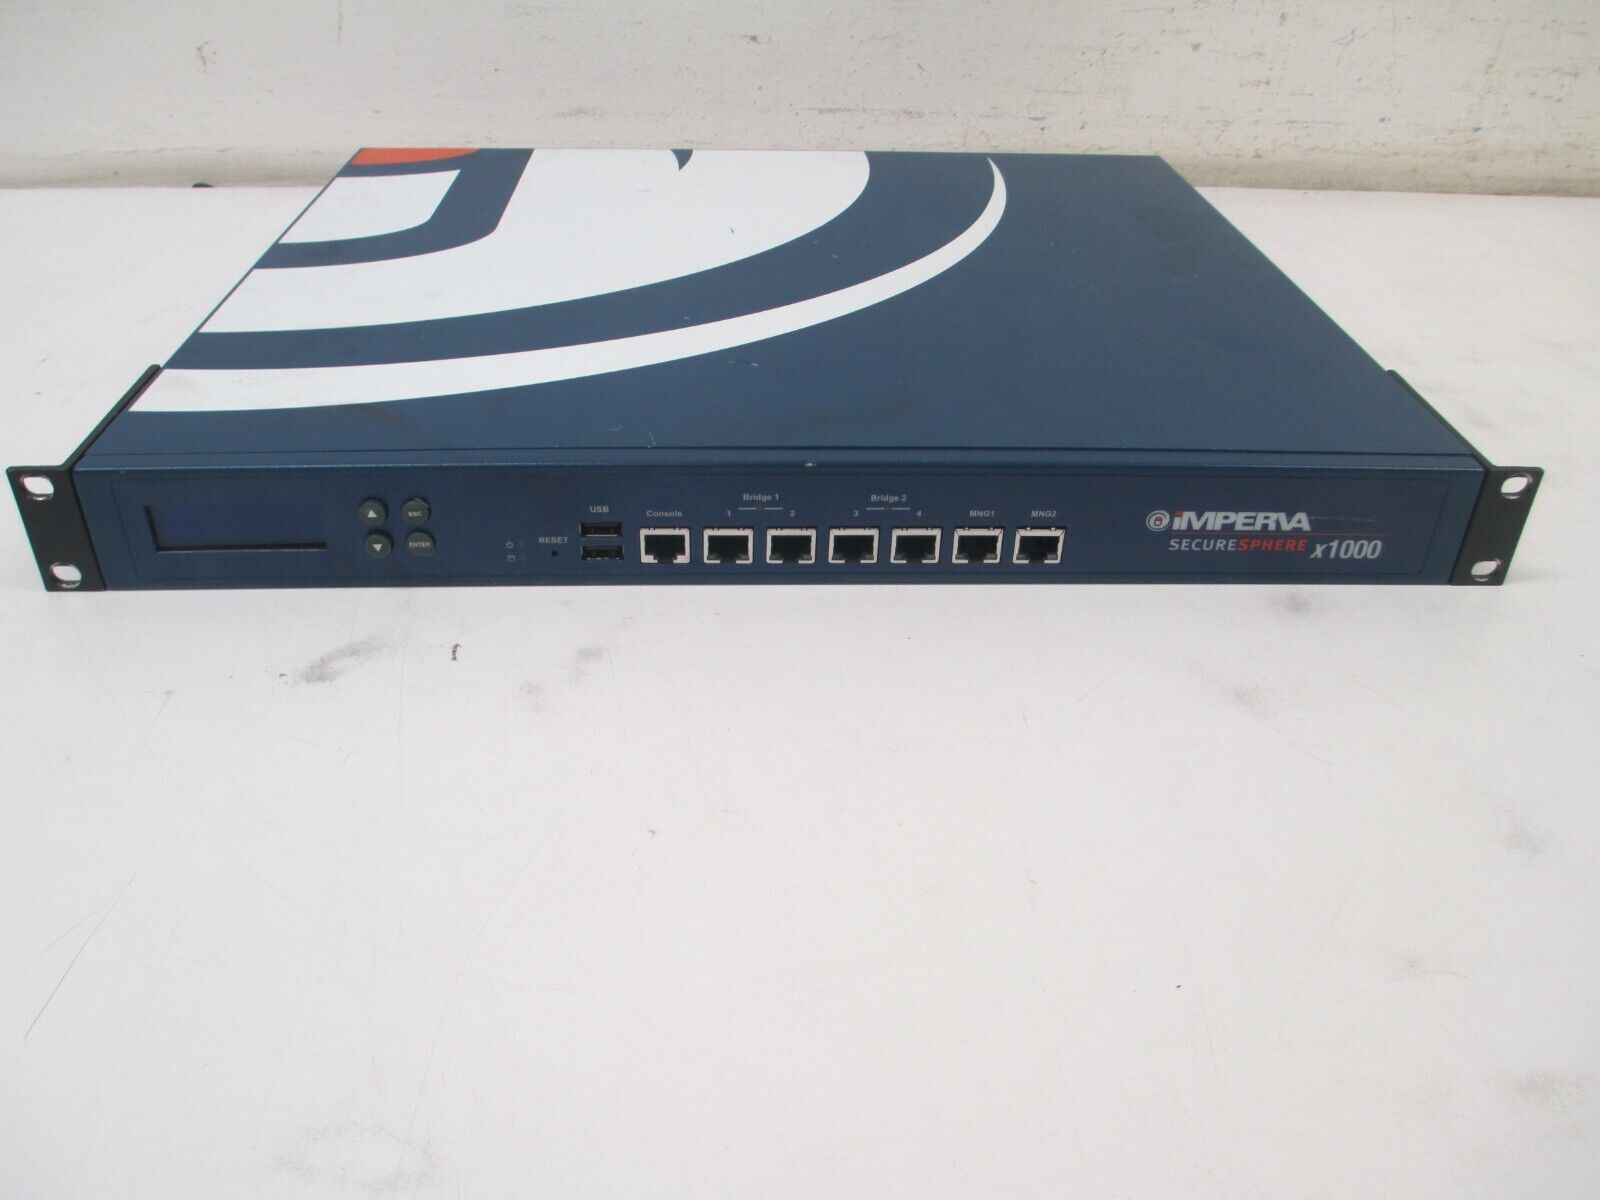 Imperva SecureSphere X1000 Network Security/Firewall Appliance